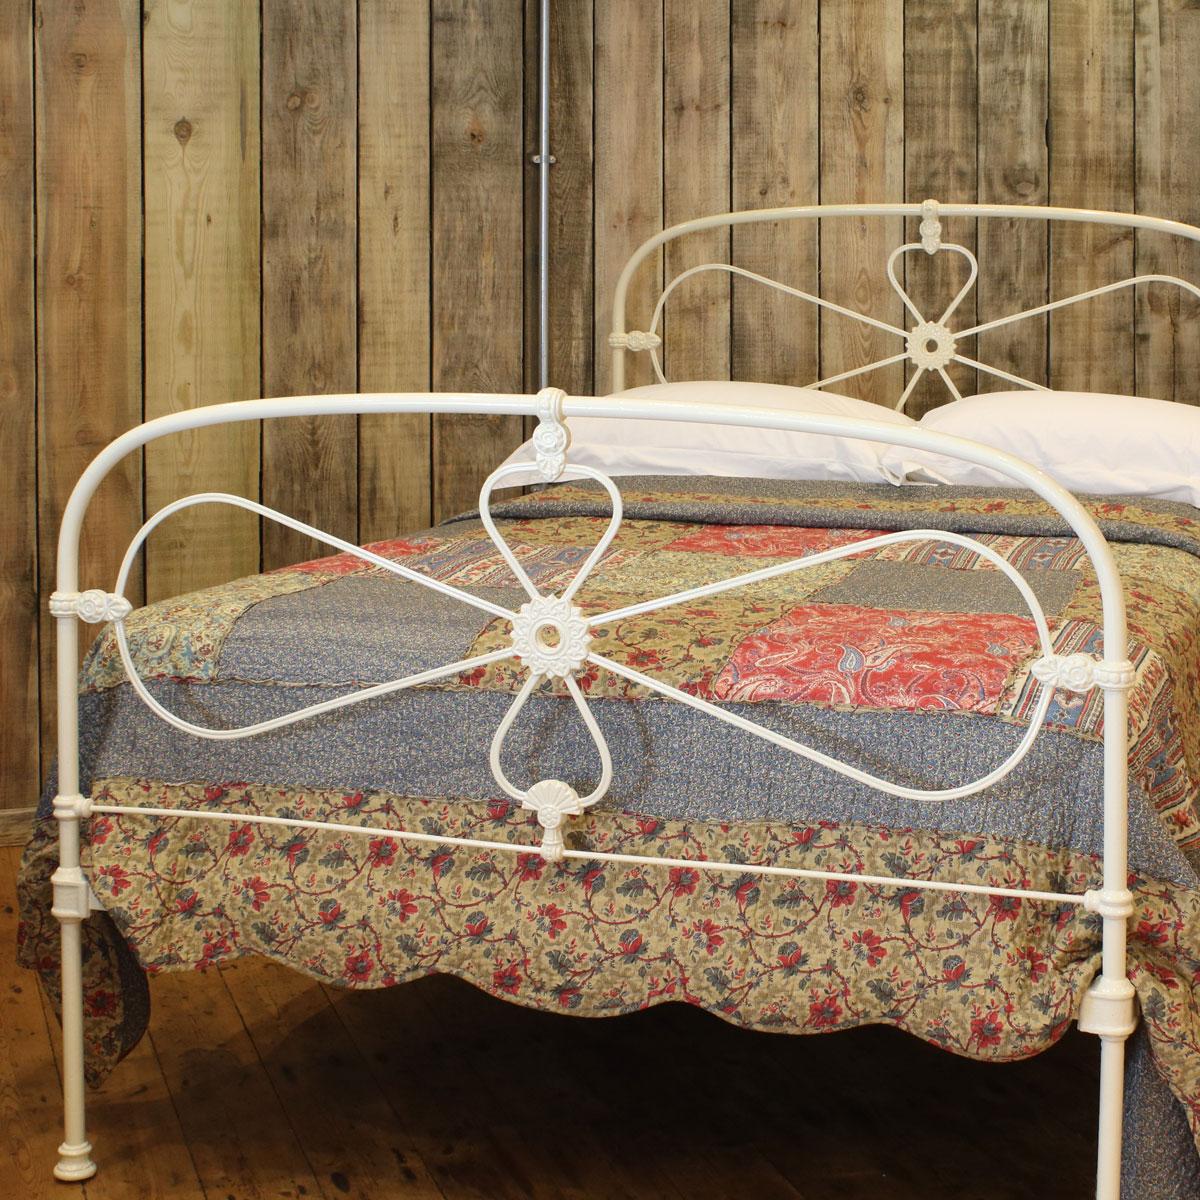 Double antique bed in cream with arch design.

The price is for the bed frames alone. The bases, mattresses, bedding and bed linen are extra.